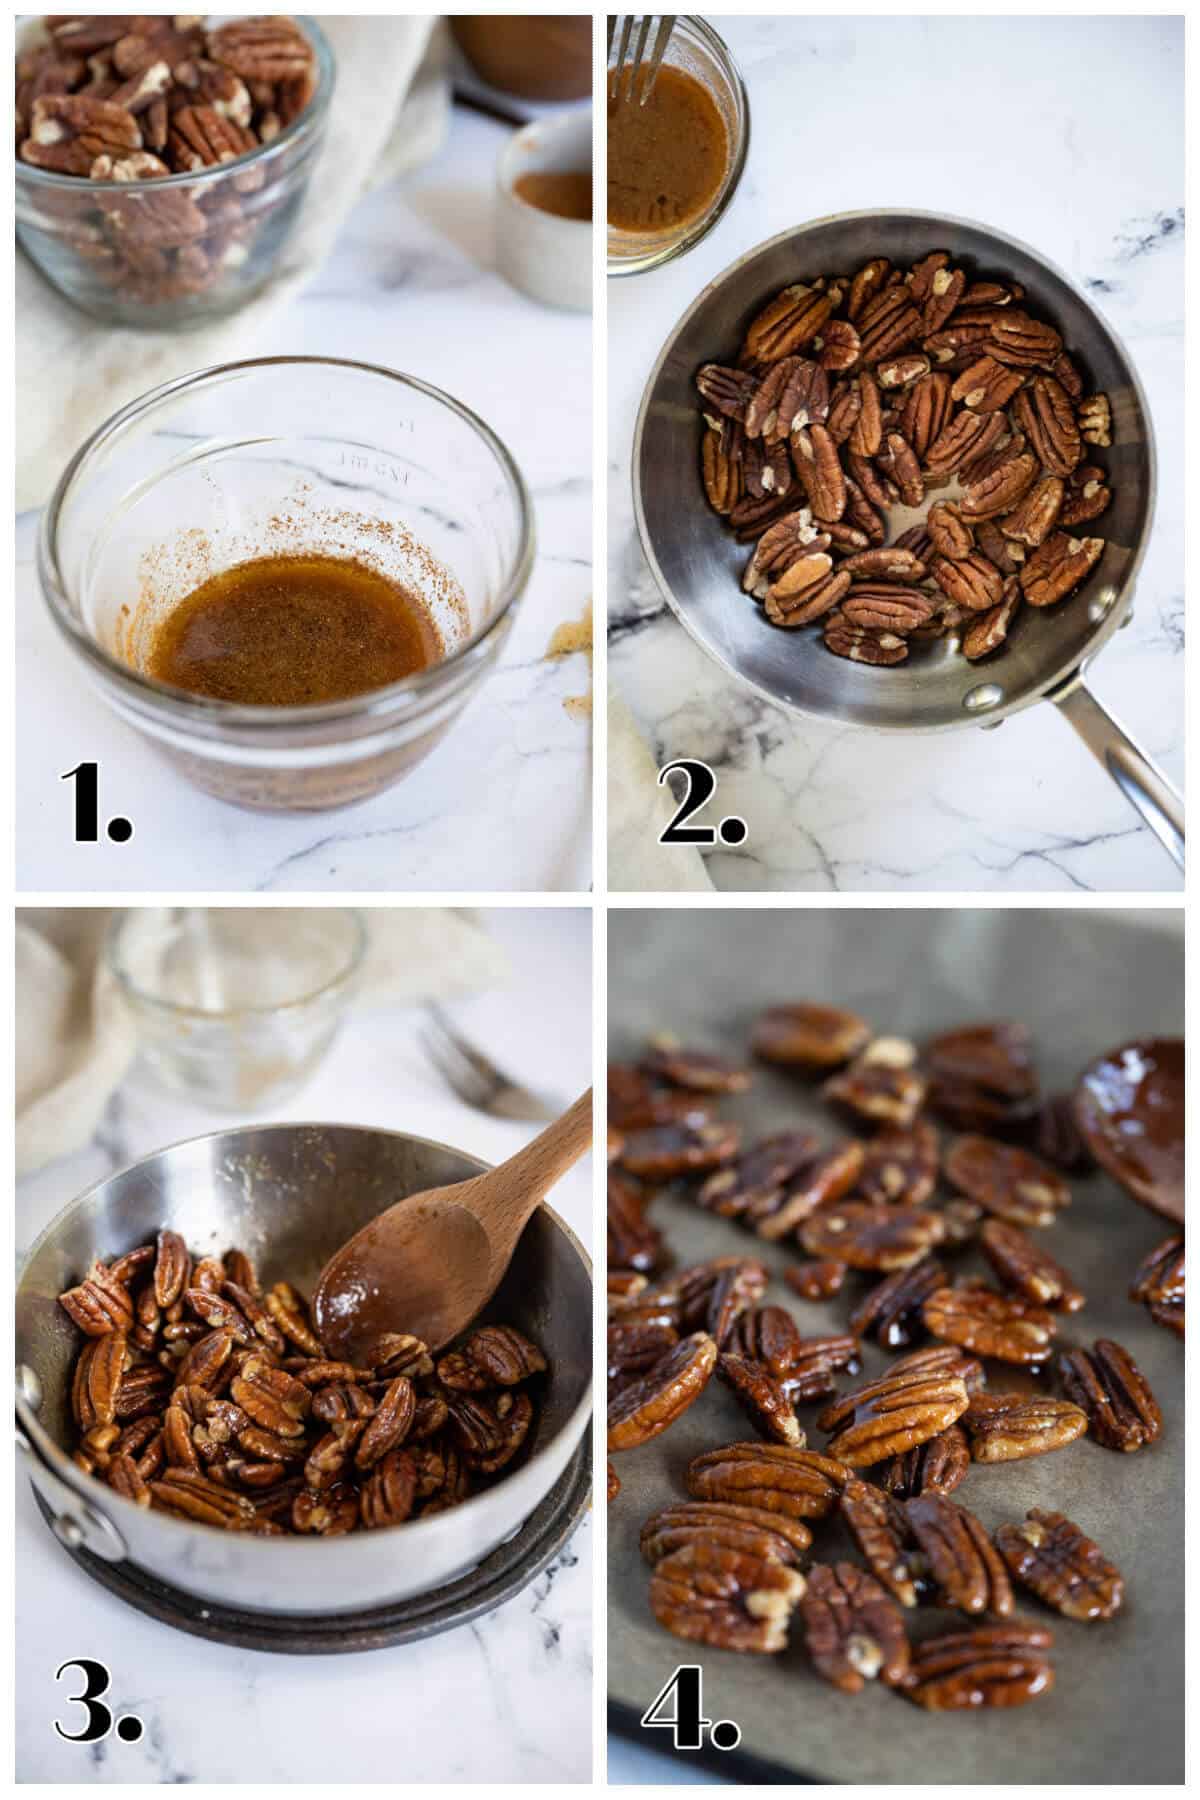 4 image collage showing steps to make Keto candied pecans; mix sauce, toast pecans, add sauce and stir, lay pecans on parchment paper.